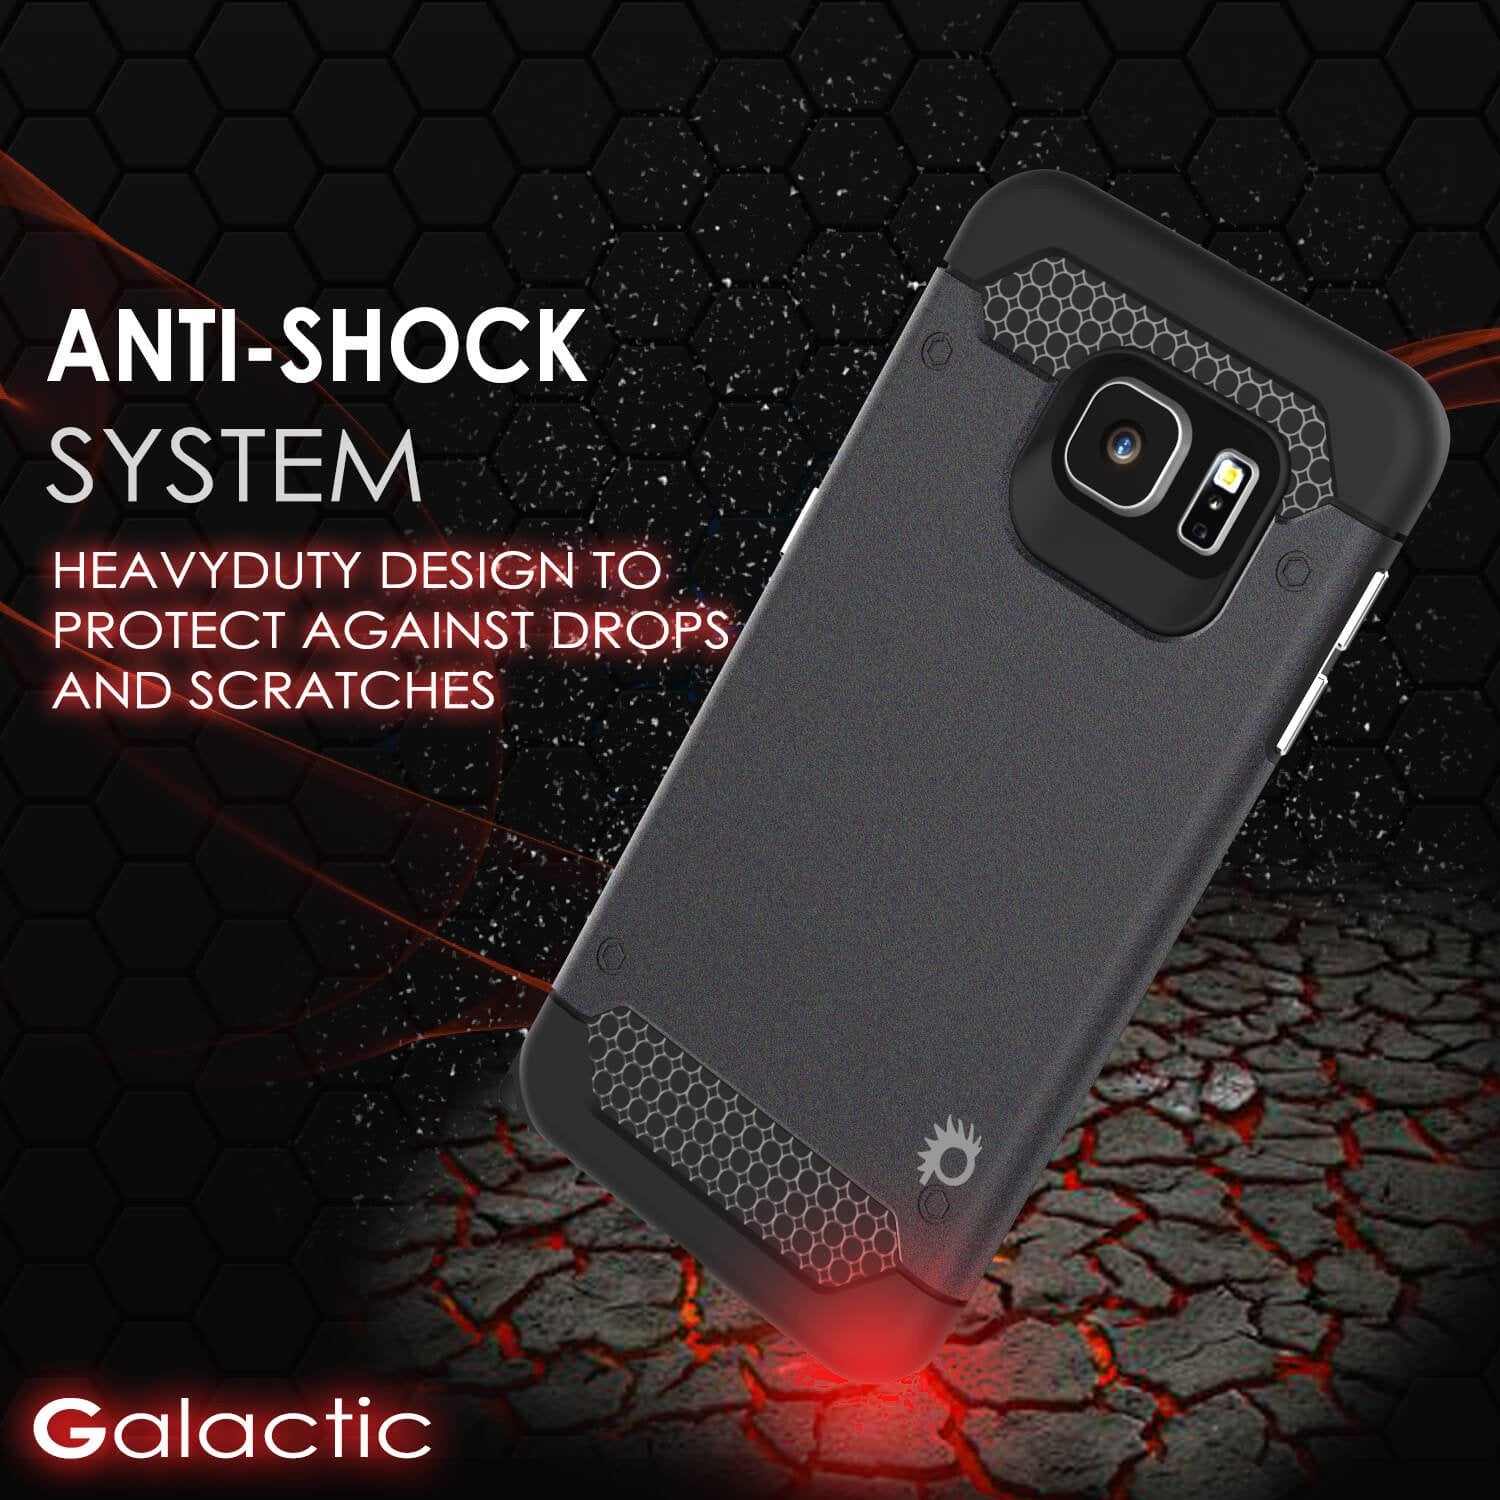 Galaxy s6 EDGE Case PunkCase Galactic Black Series Slim Armor Soft Cover w/ Screen Protector